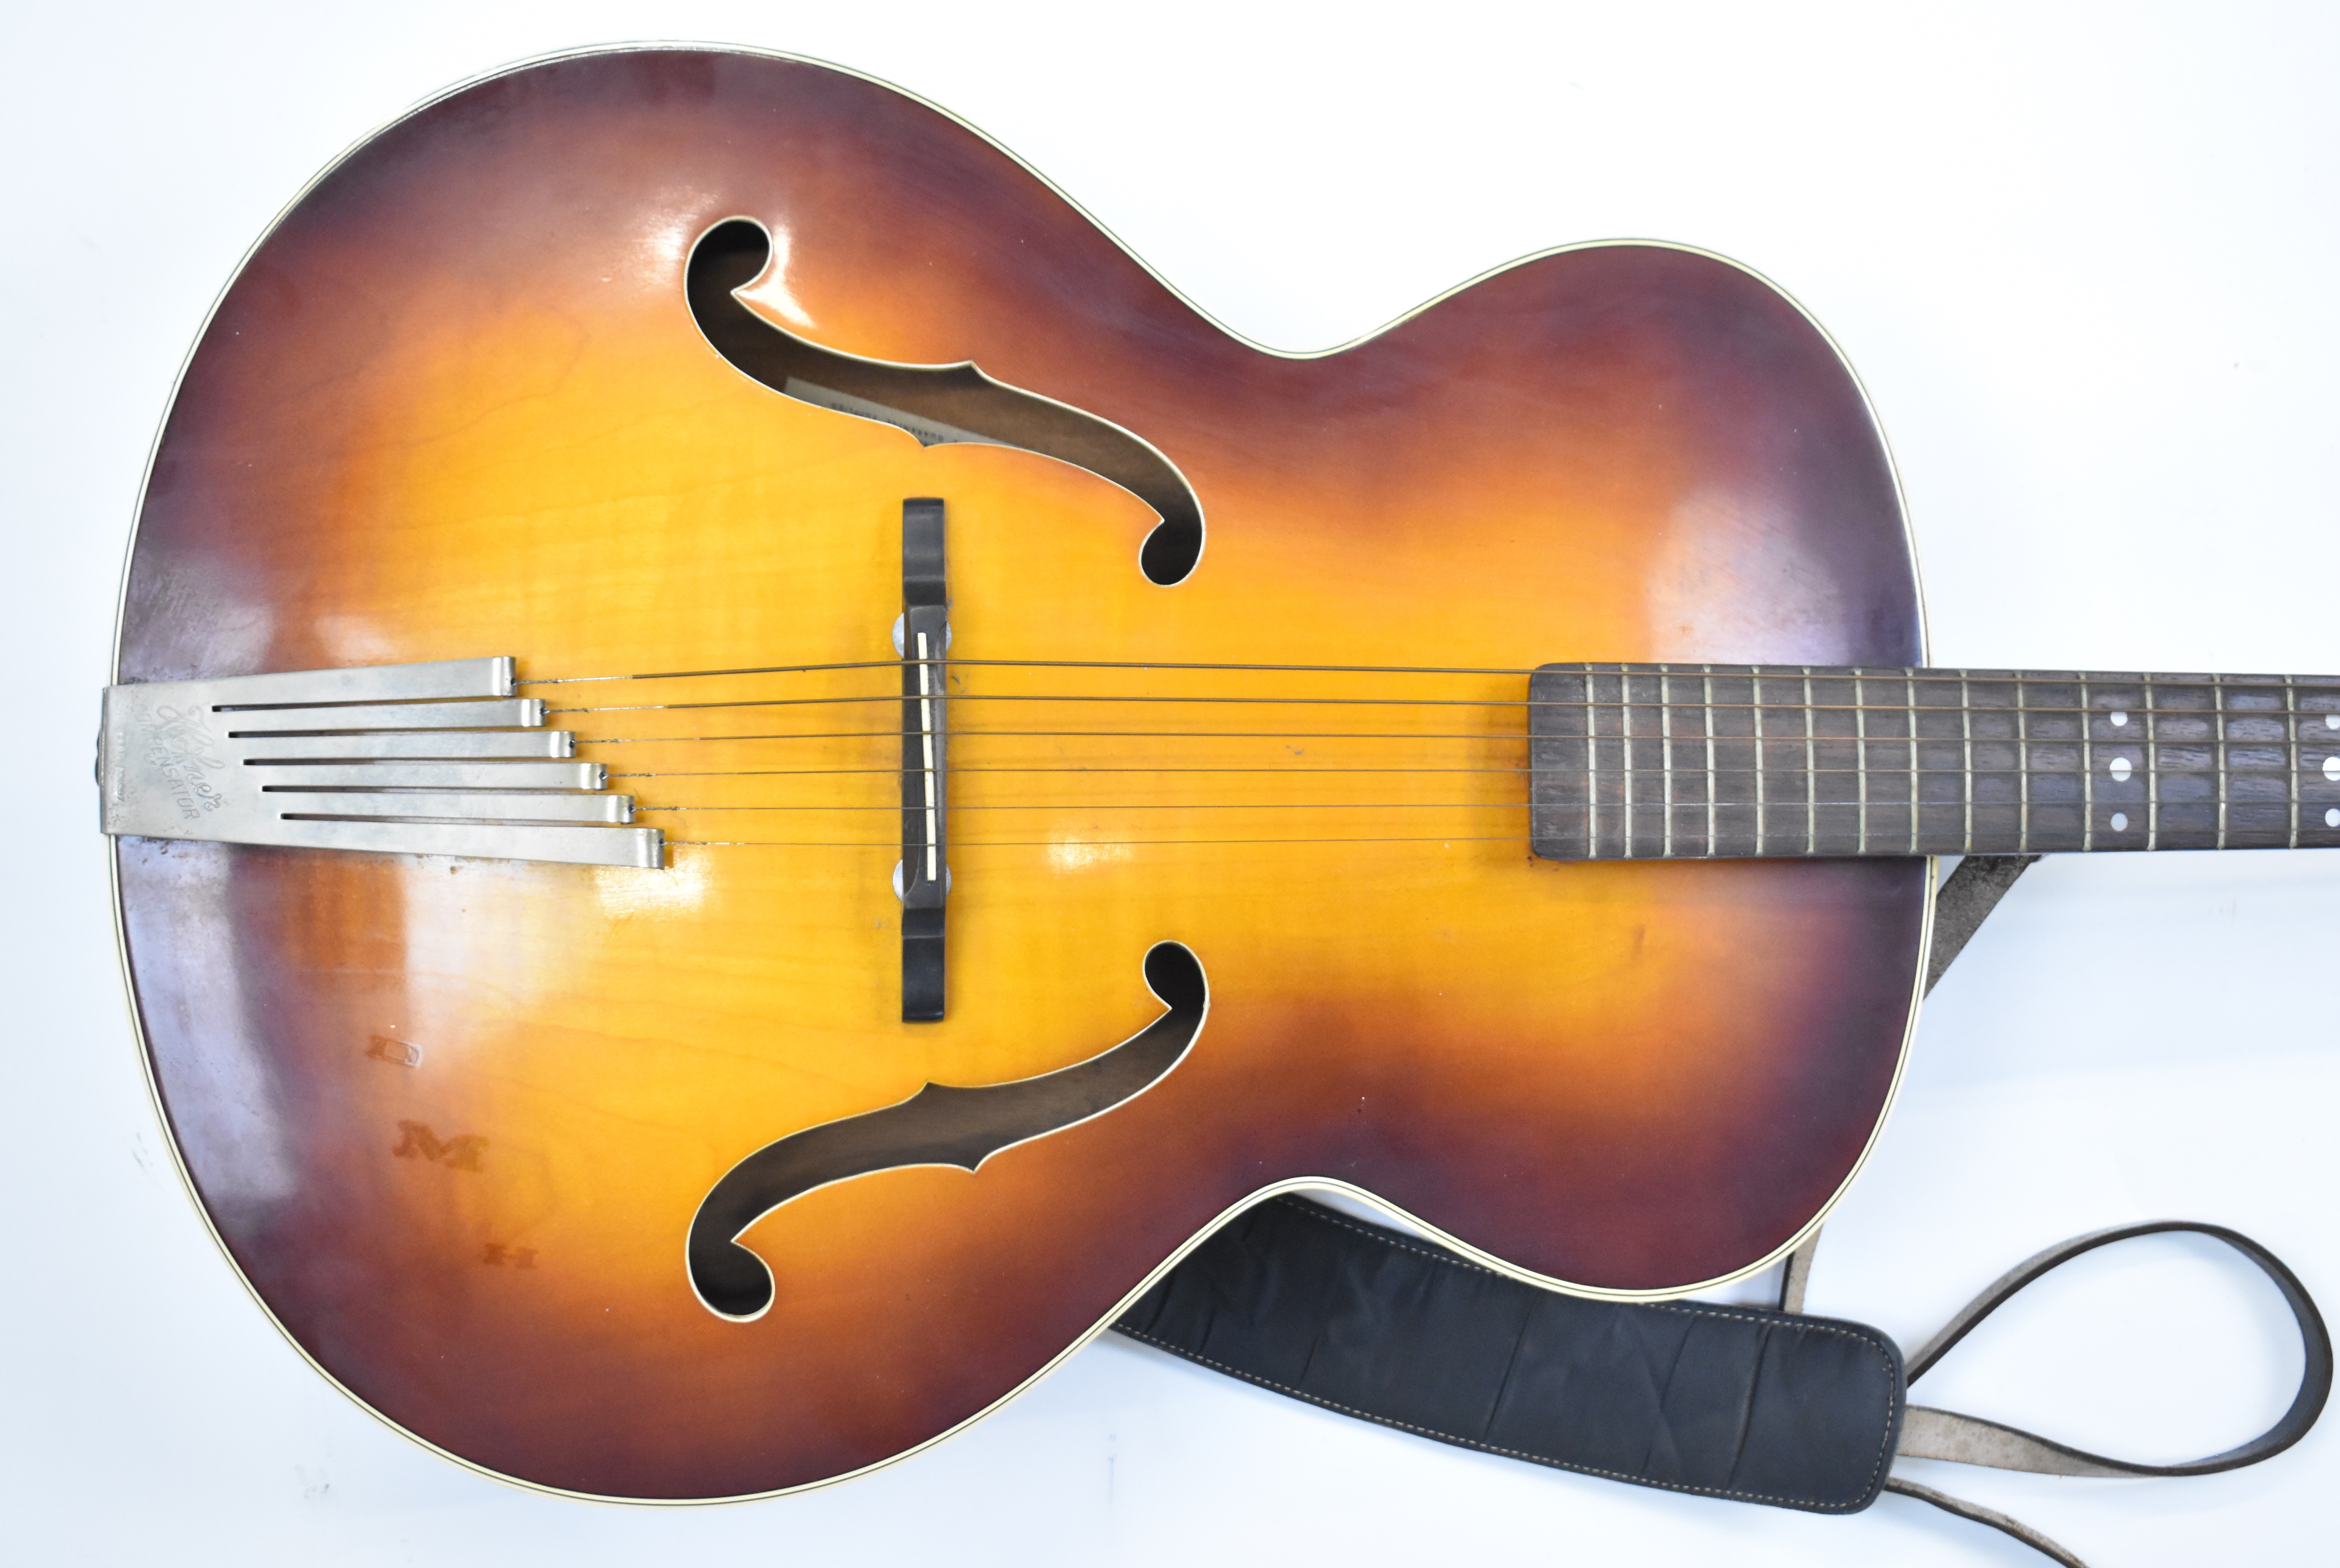 Hofner Senator acoustic guitar with faux ivory and mother of pearl decoration, length 105cm - Image 2 of 9